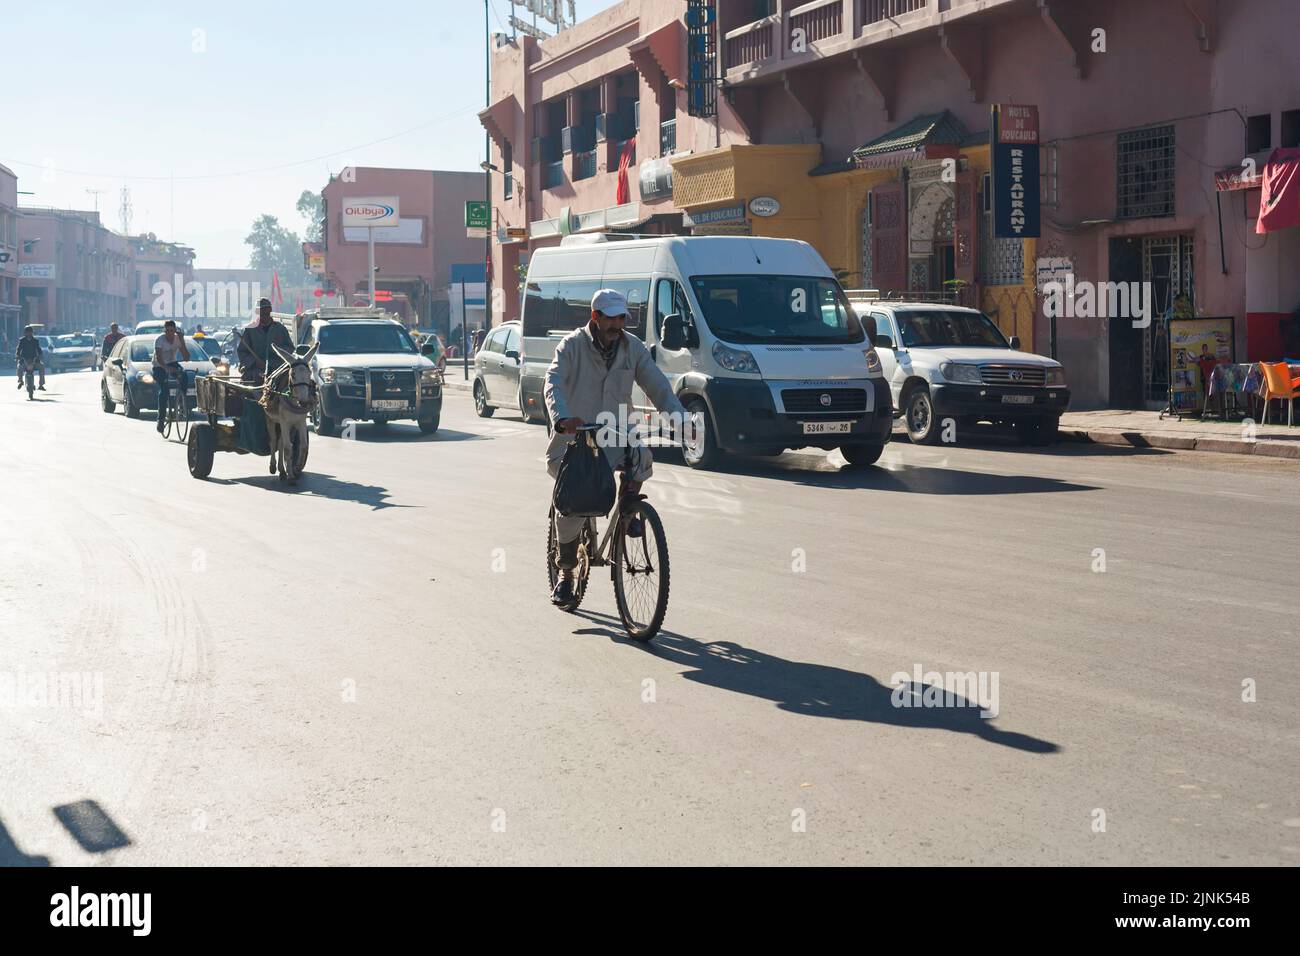 Street scene on a sunny day in Marrakesh, Morocco Stock Photo